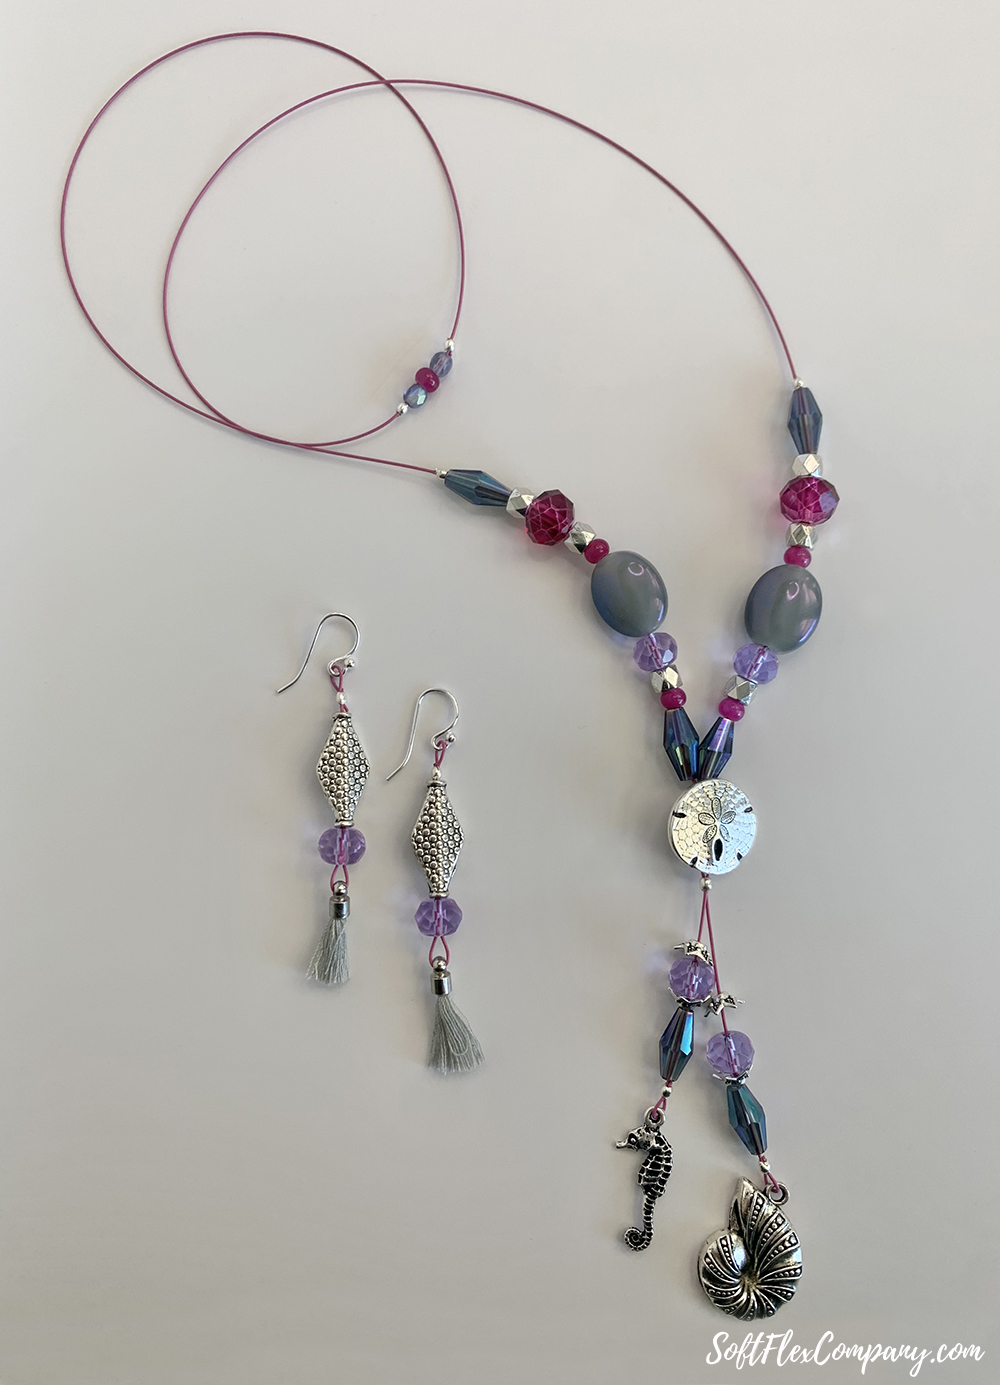 Weekly Video Recap: Learn How To Make Jewelry With Knitting Spools And ...